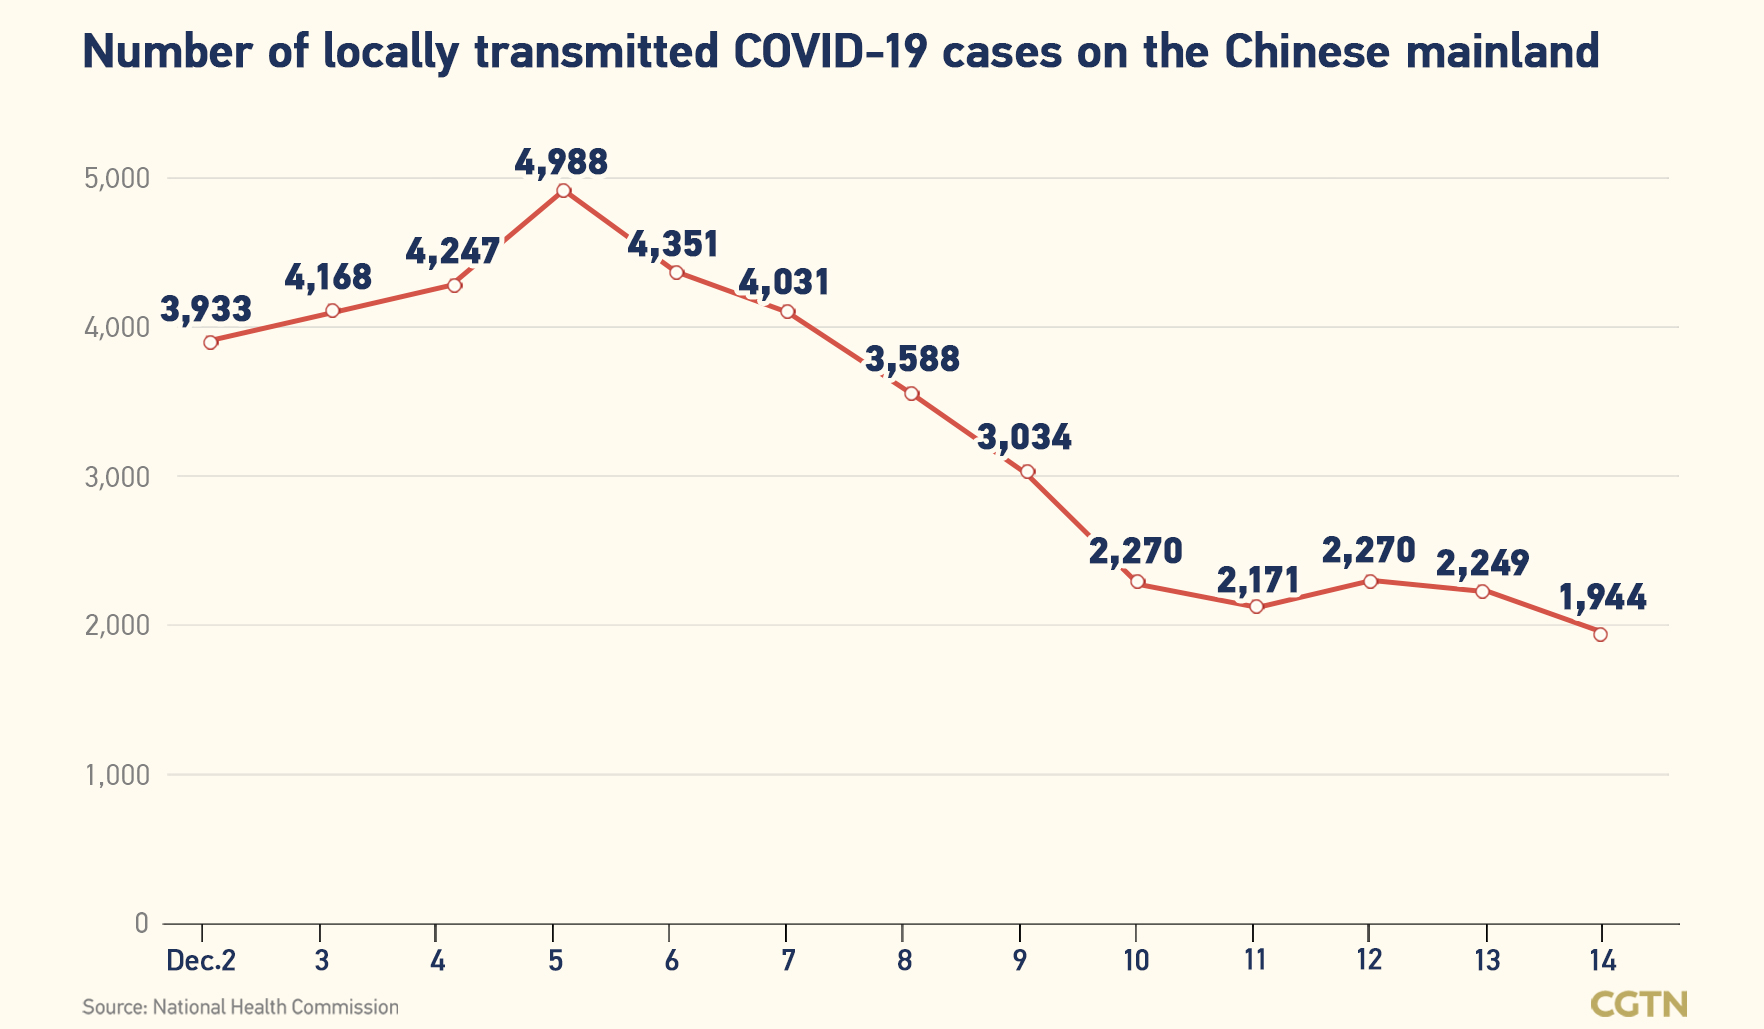 Chinese mainland records 2,000 new confirmed COVID-19 cases